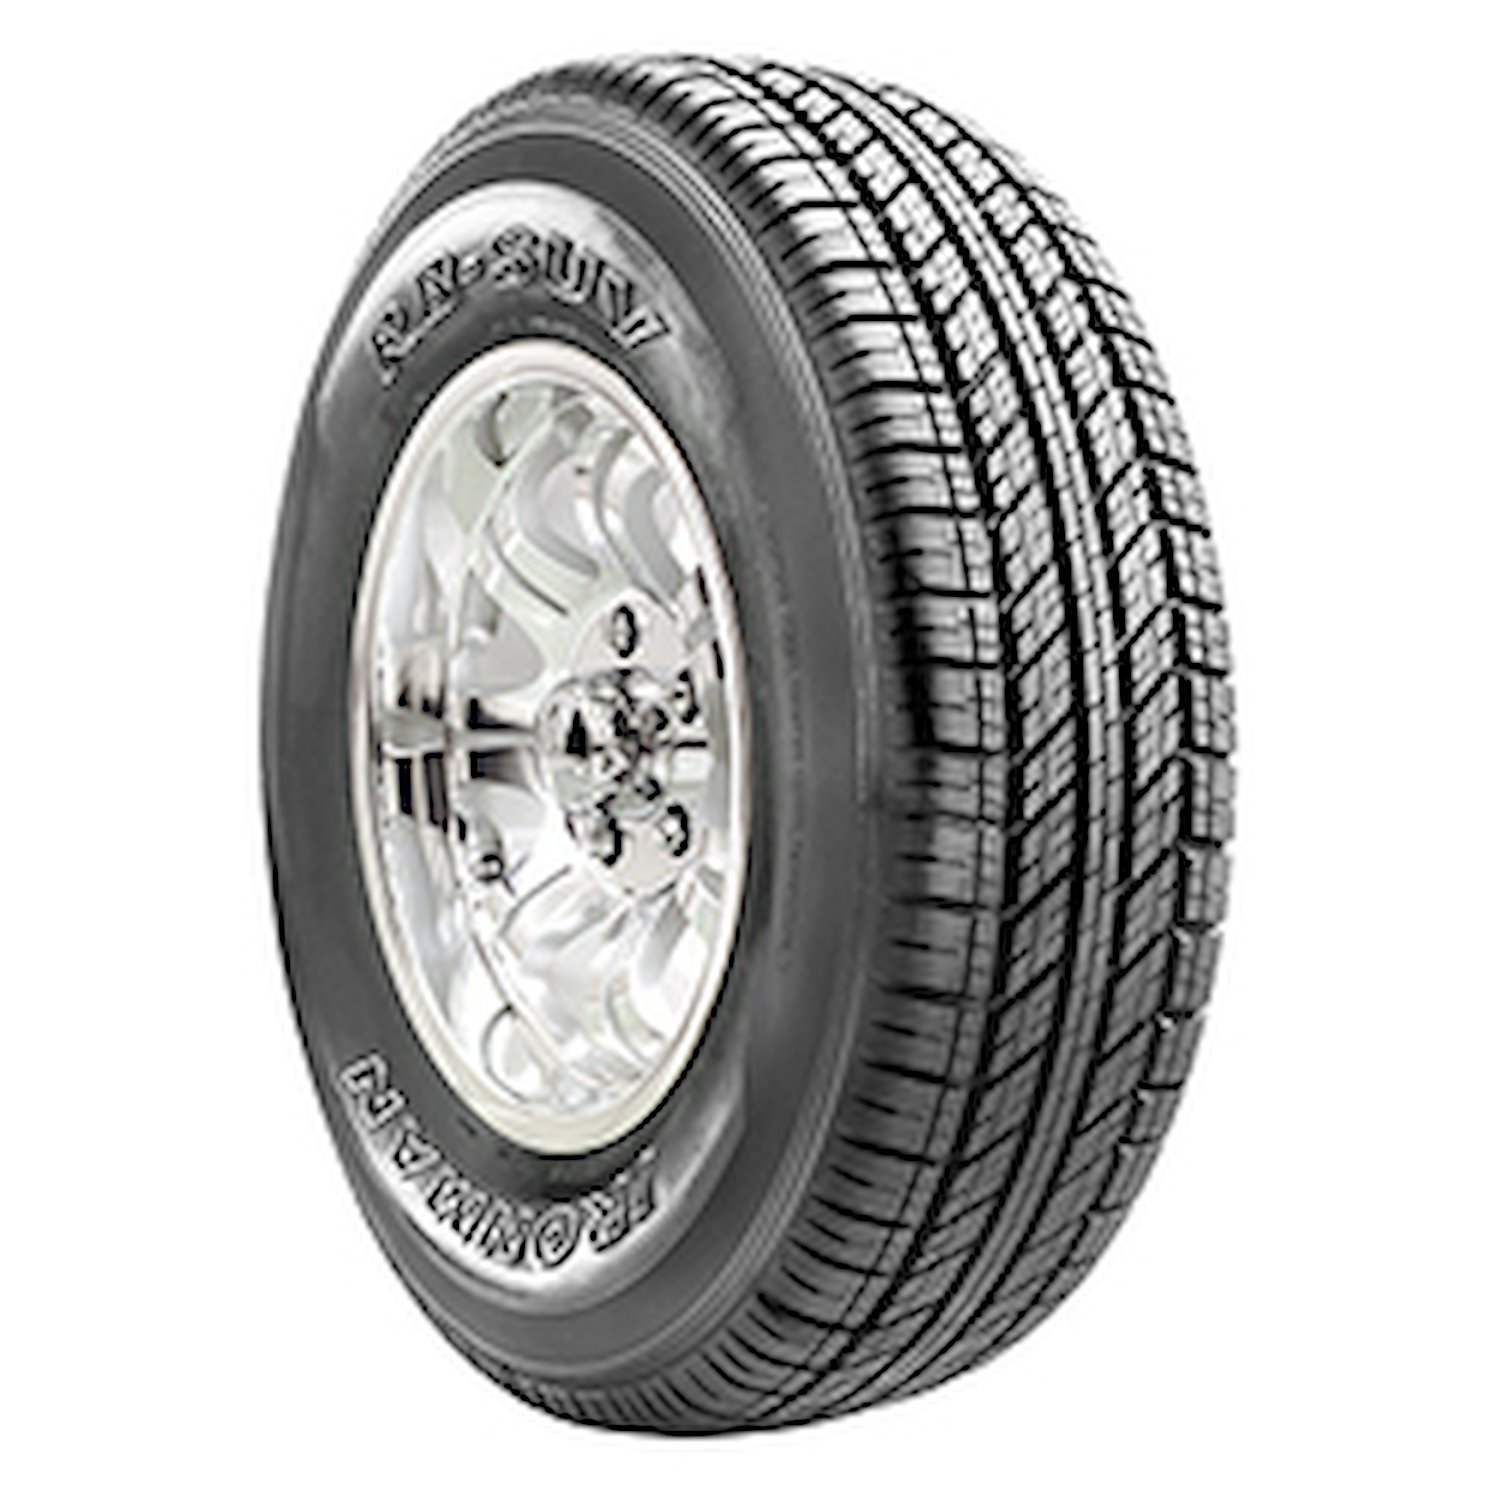 RB SUV Tire, 225/70R16 103T